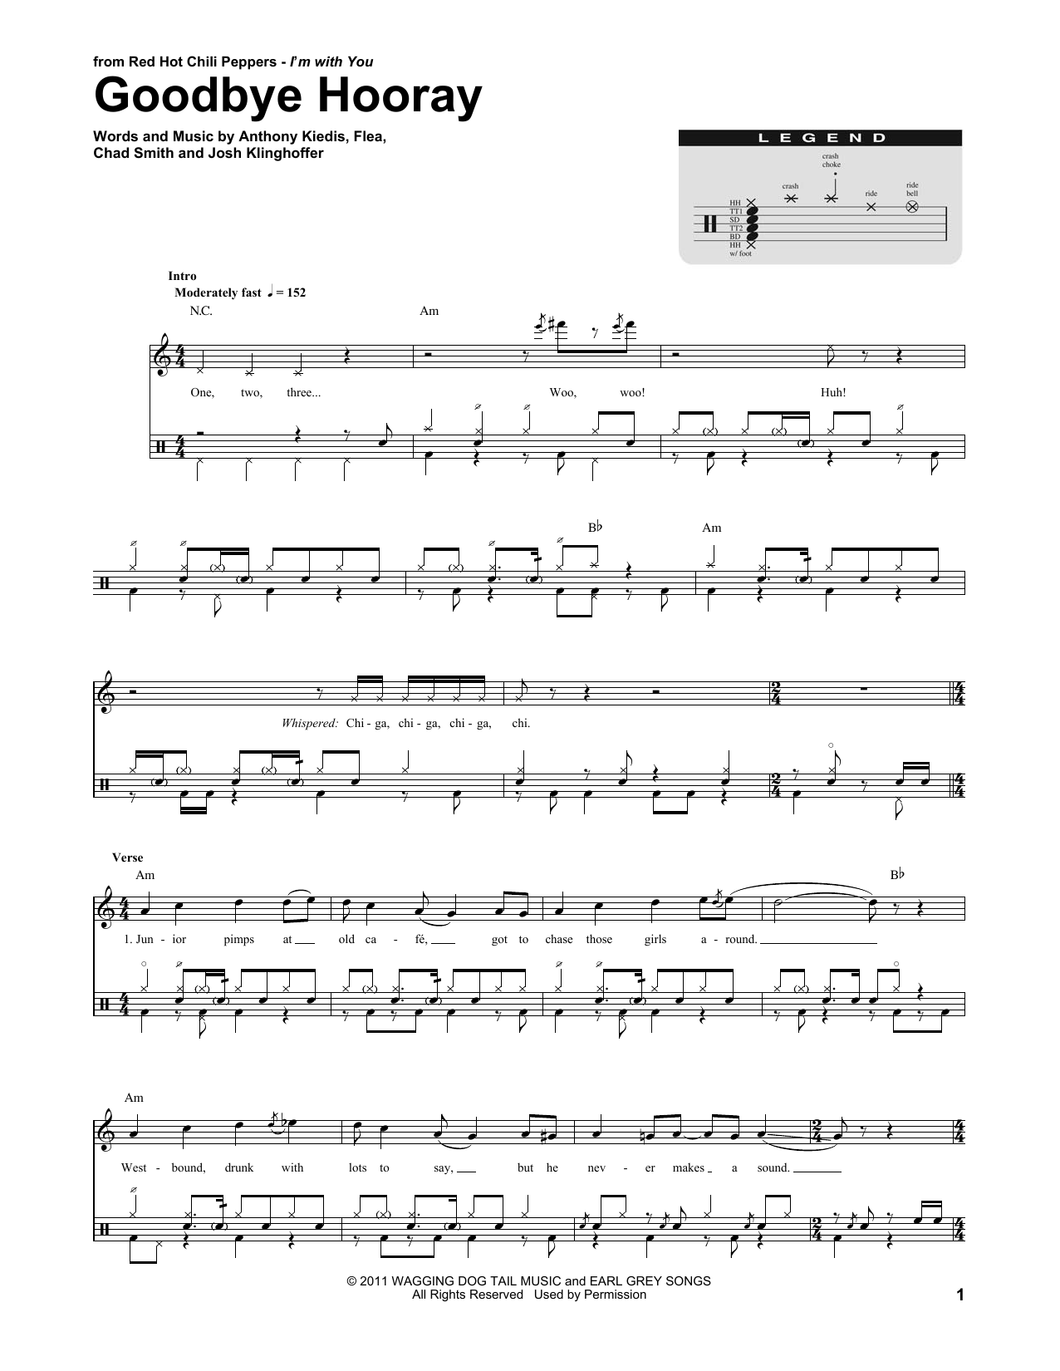 Goodbye Hooray - Red Hot Chili Peppers - Full Drum Transcription / Drum Sheet Music - SheetMusicDirect DT